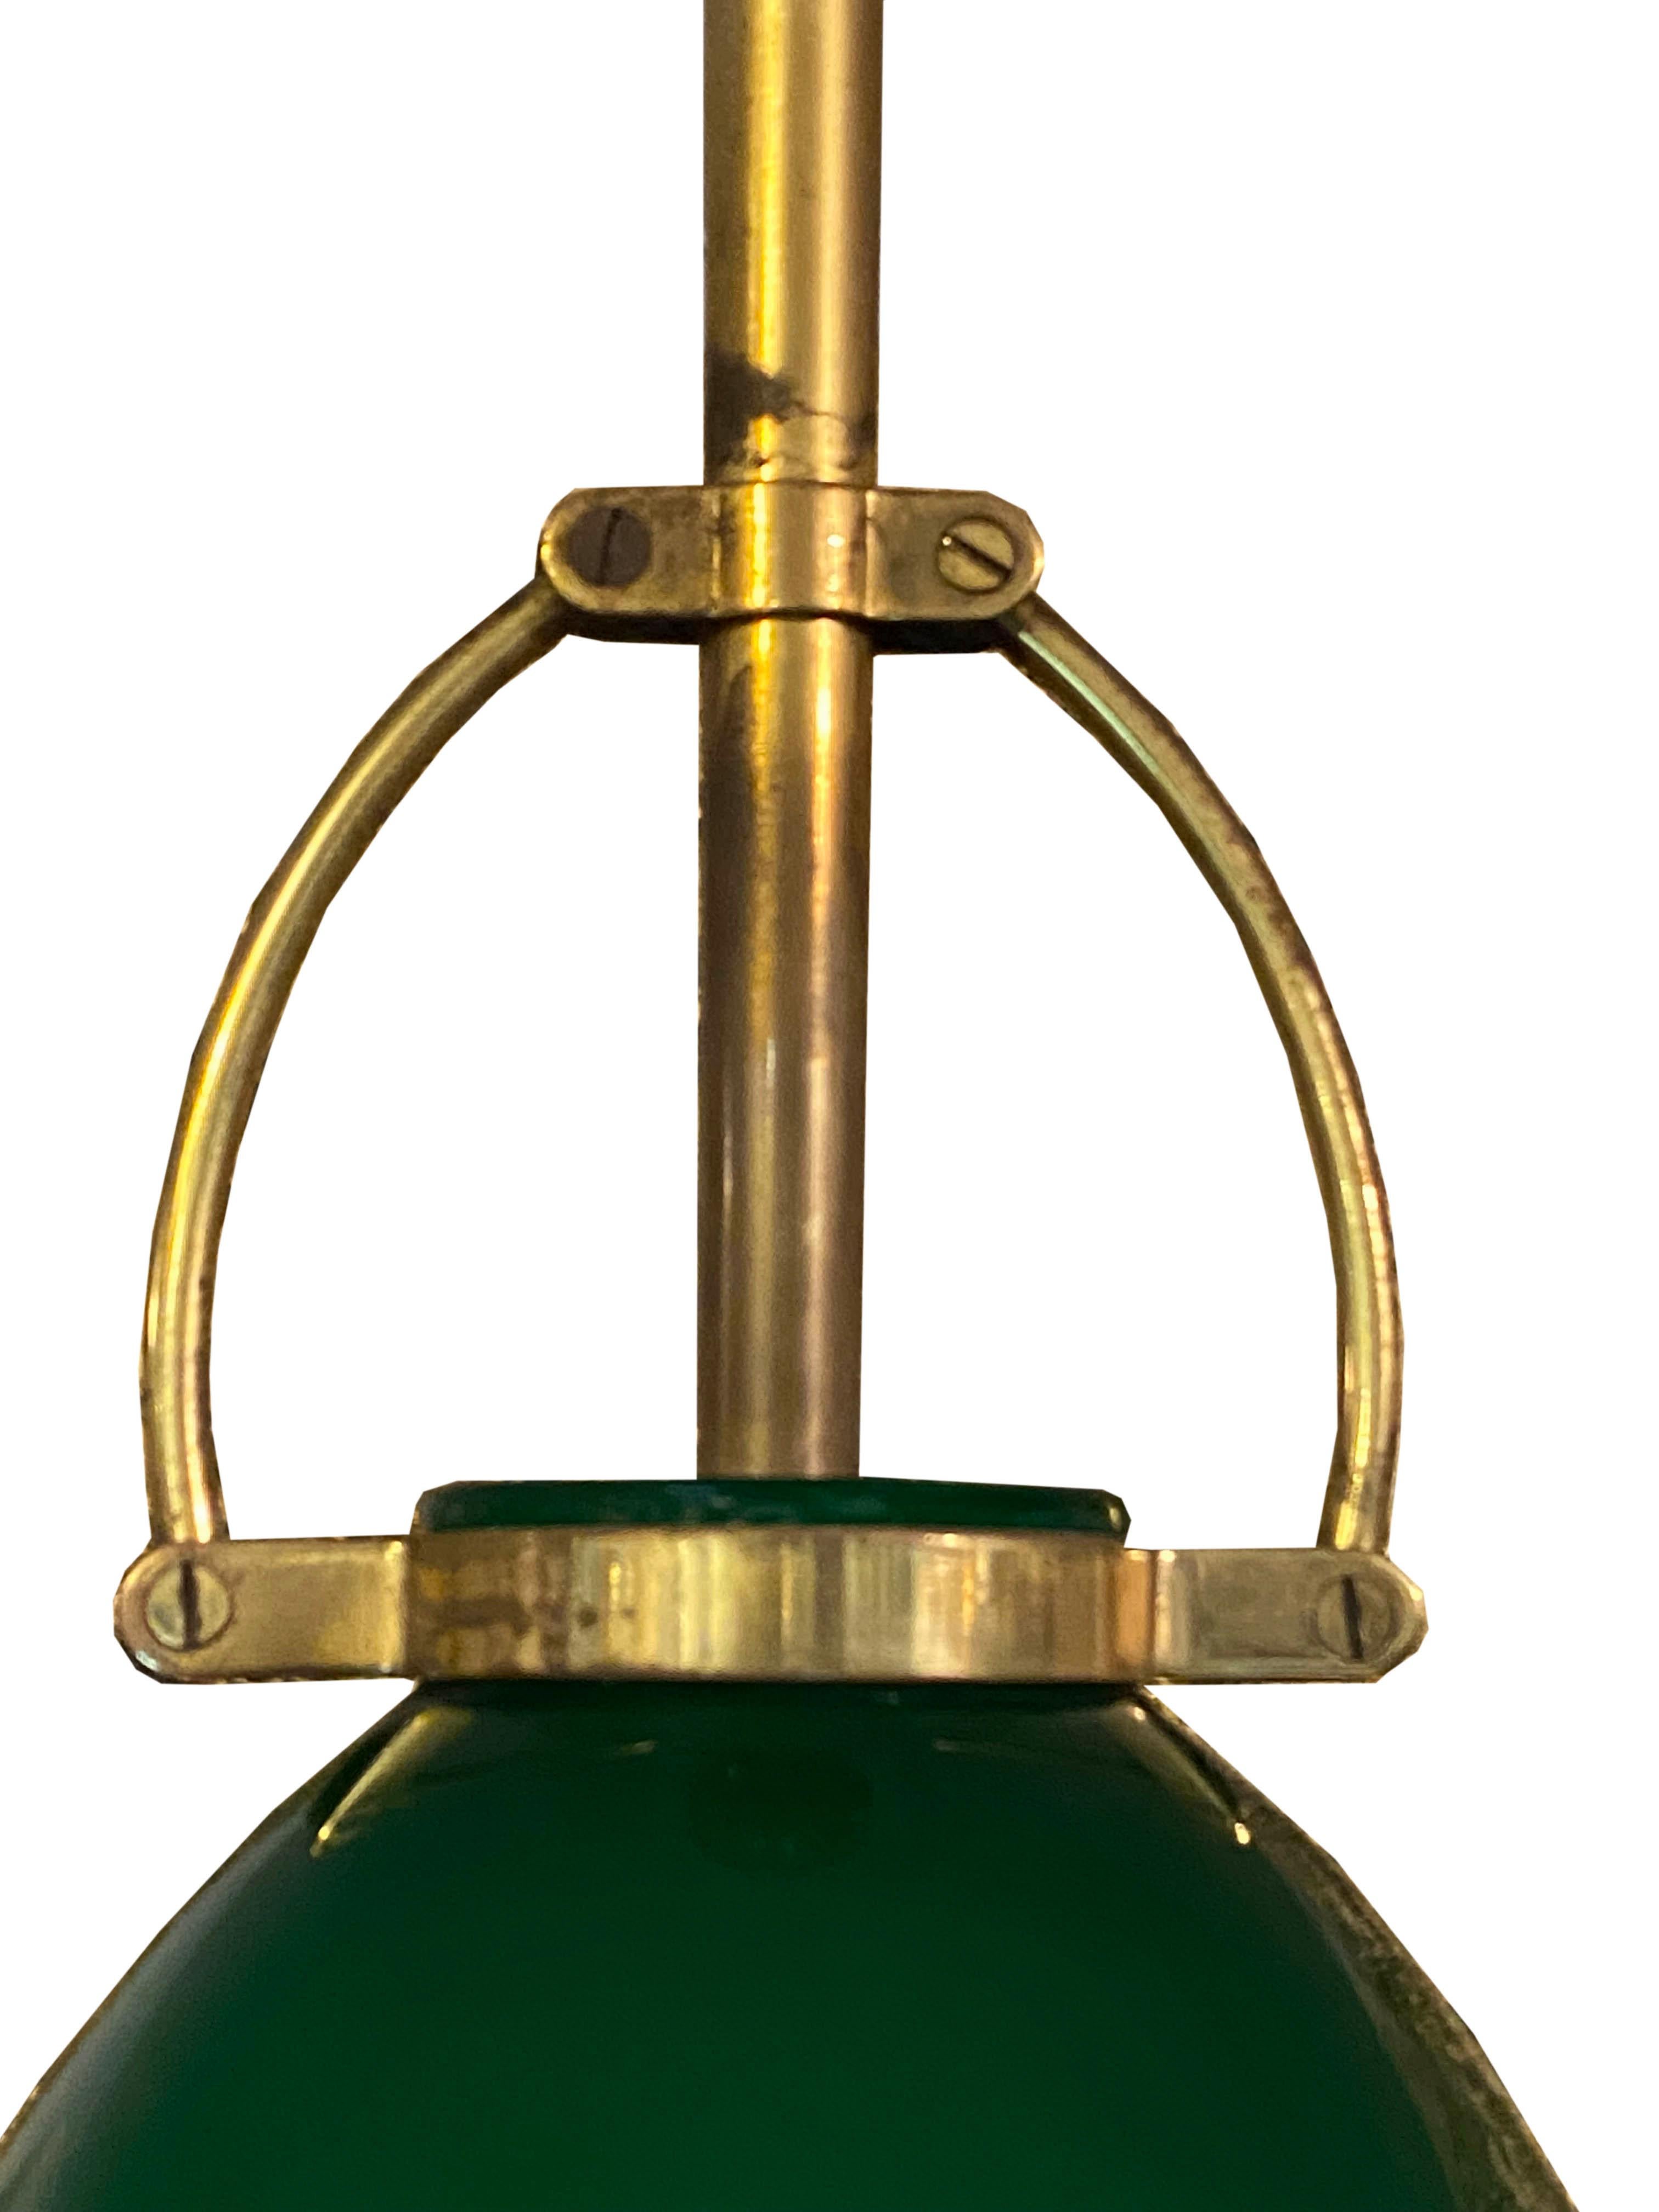 Ceiling lamp with a green glass diffuser with an opaline interior.

The lamp is made in Italy and dates from the 1950s. It has a brass stem and a circular base.

In the style of Stilnovo.